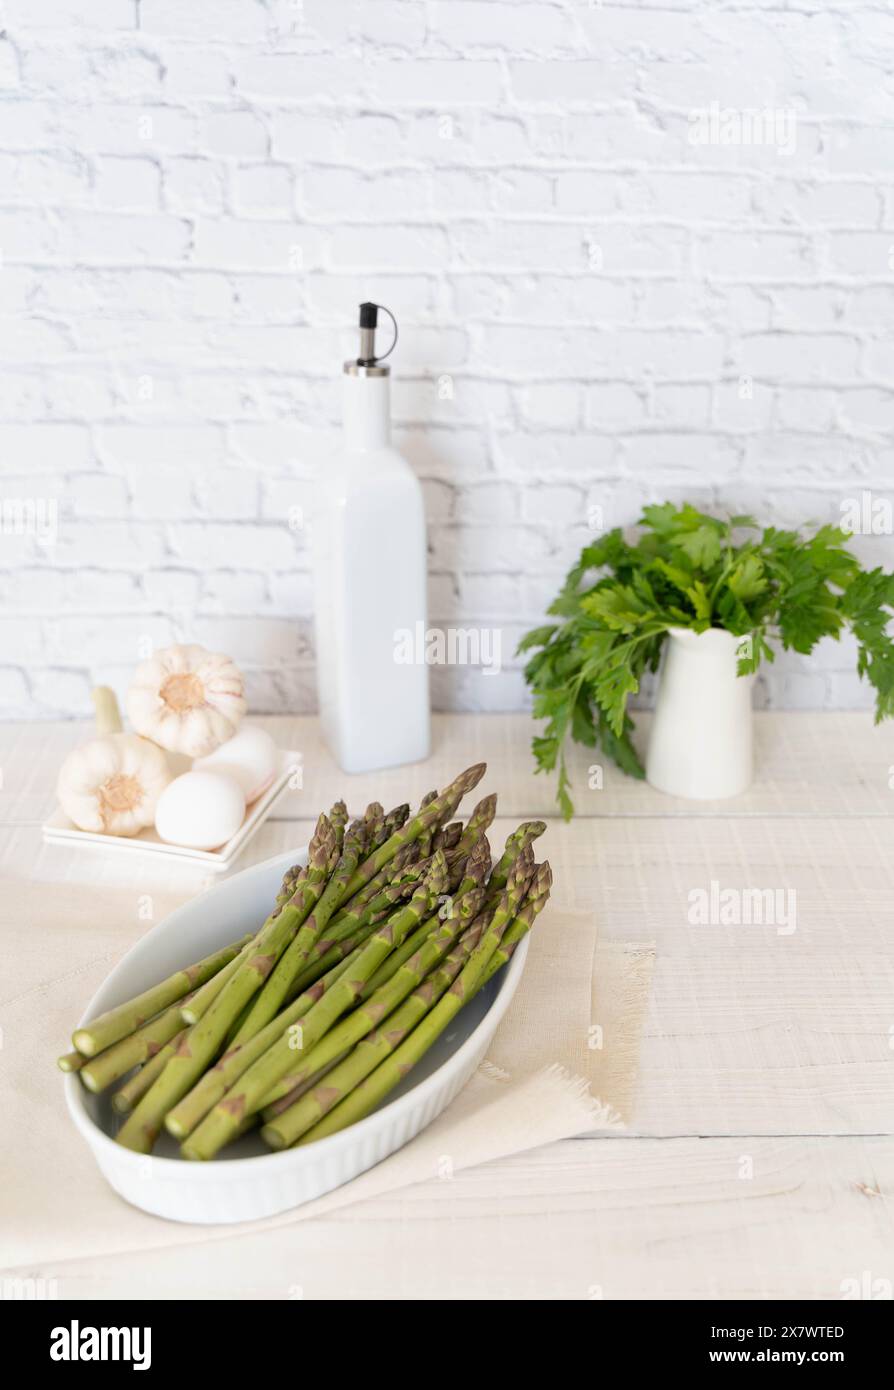 Crisp Green Asparagus shown in baking tray, ready for cooking. In the background the produce is framed by olive oil bottle and other ingredients Stock Photo